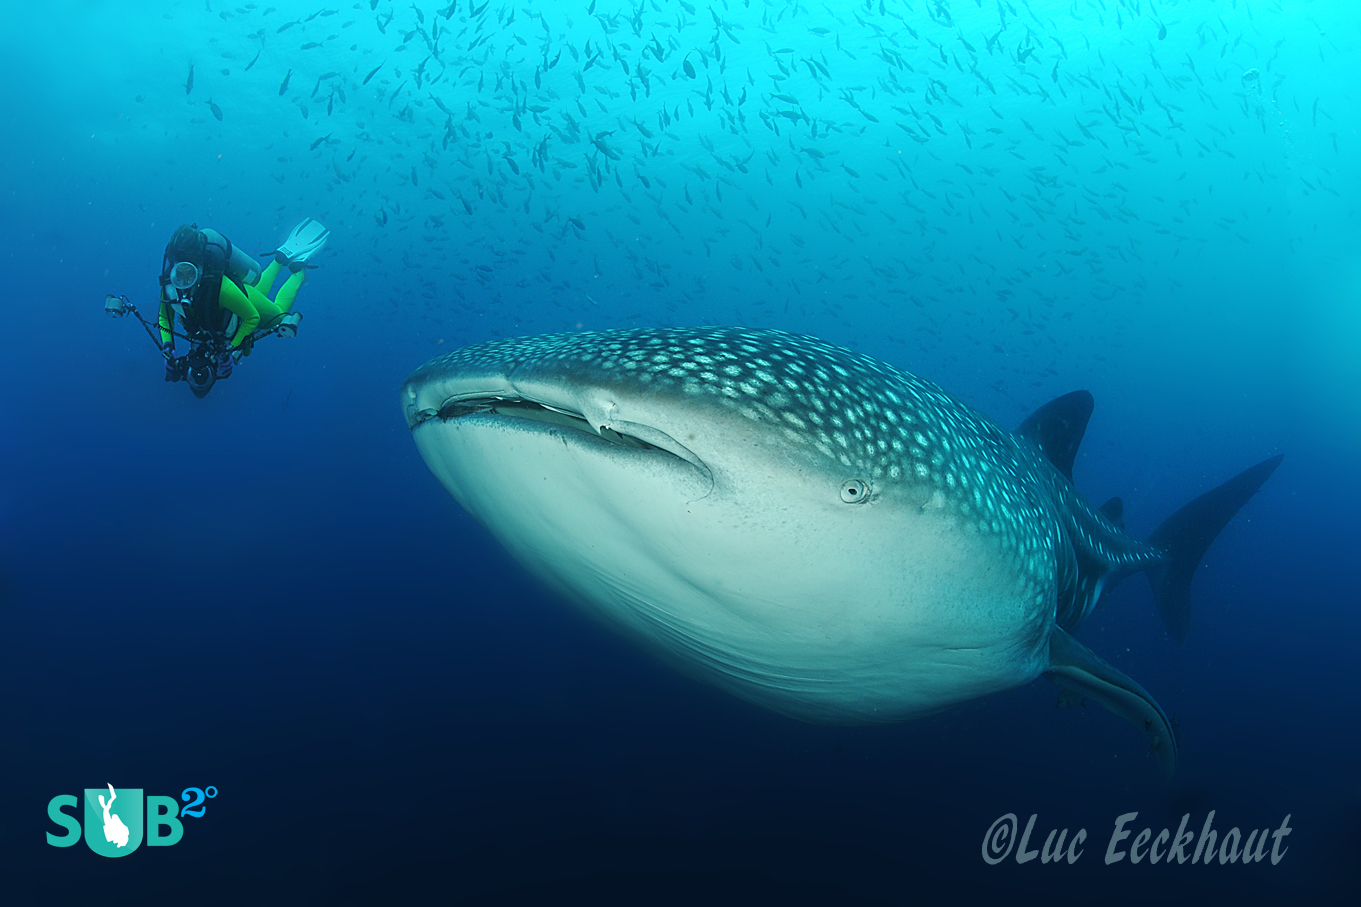 The biggest of all fish, the 20 ton whale shark.